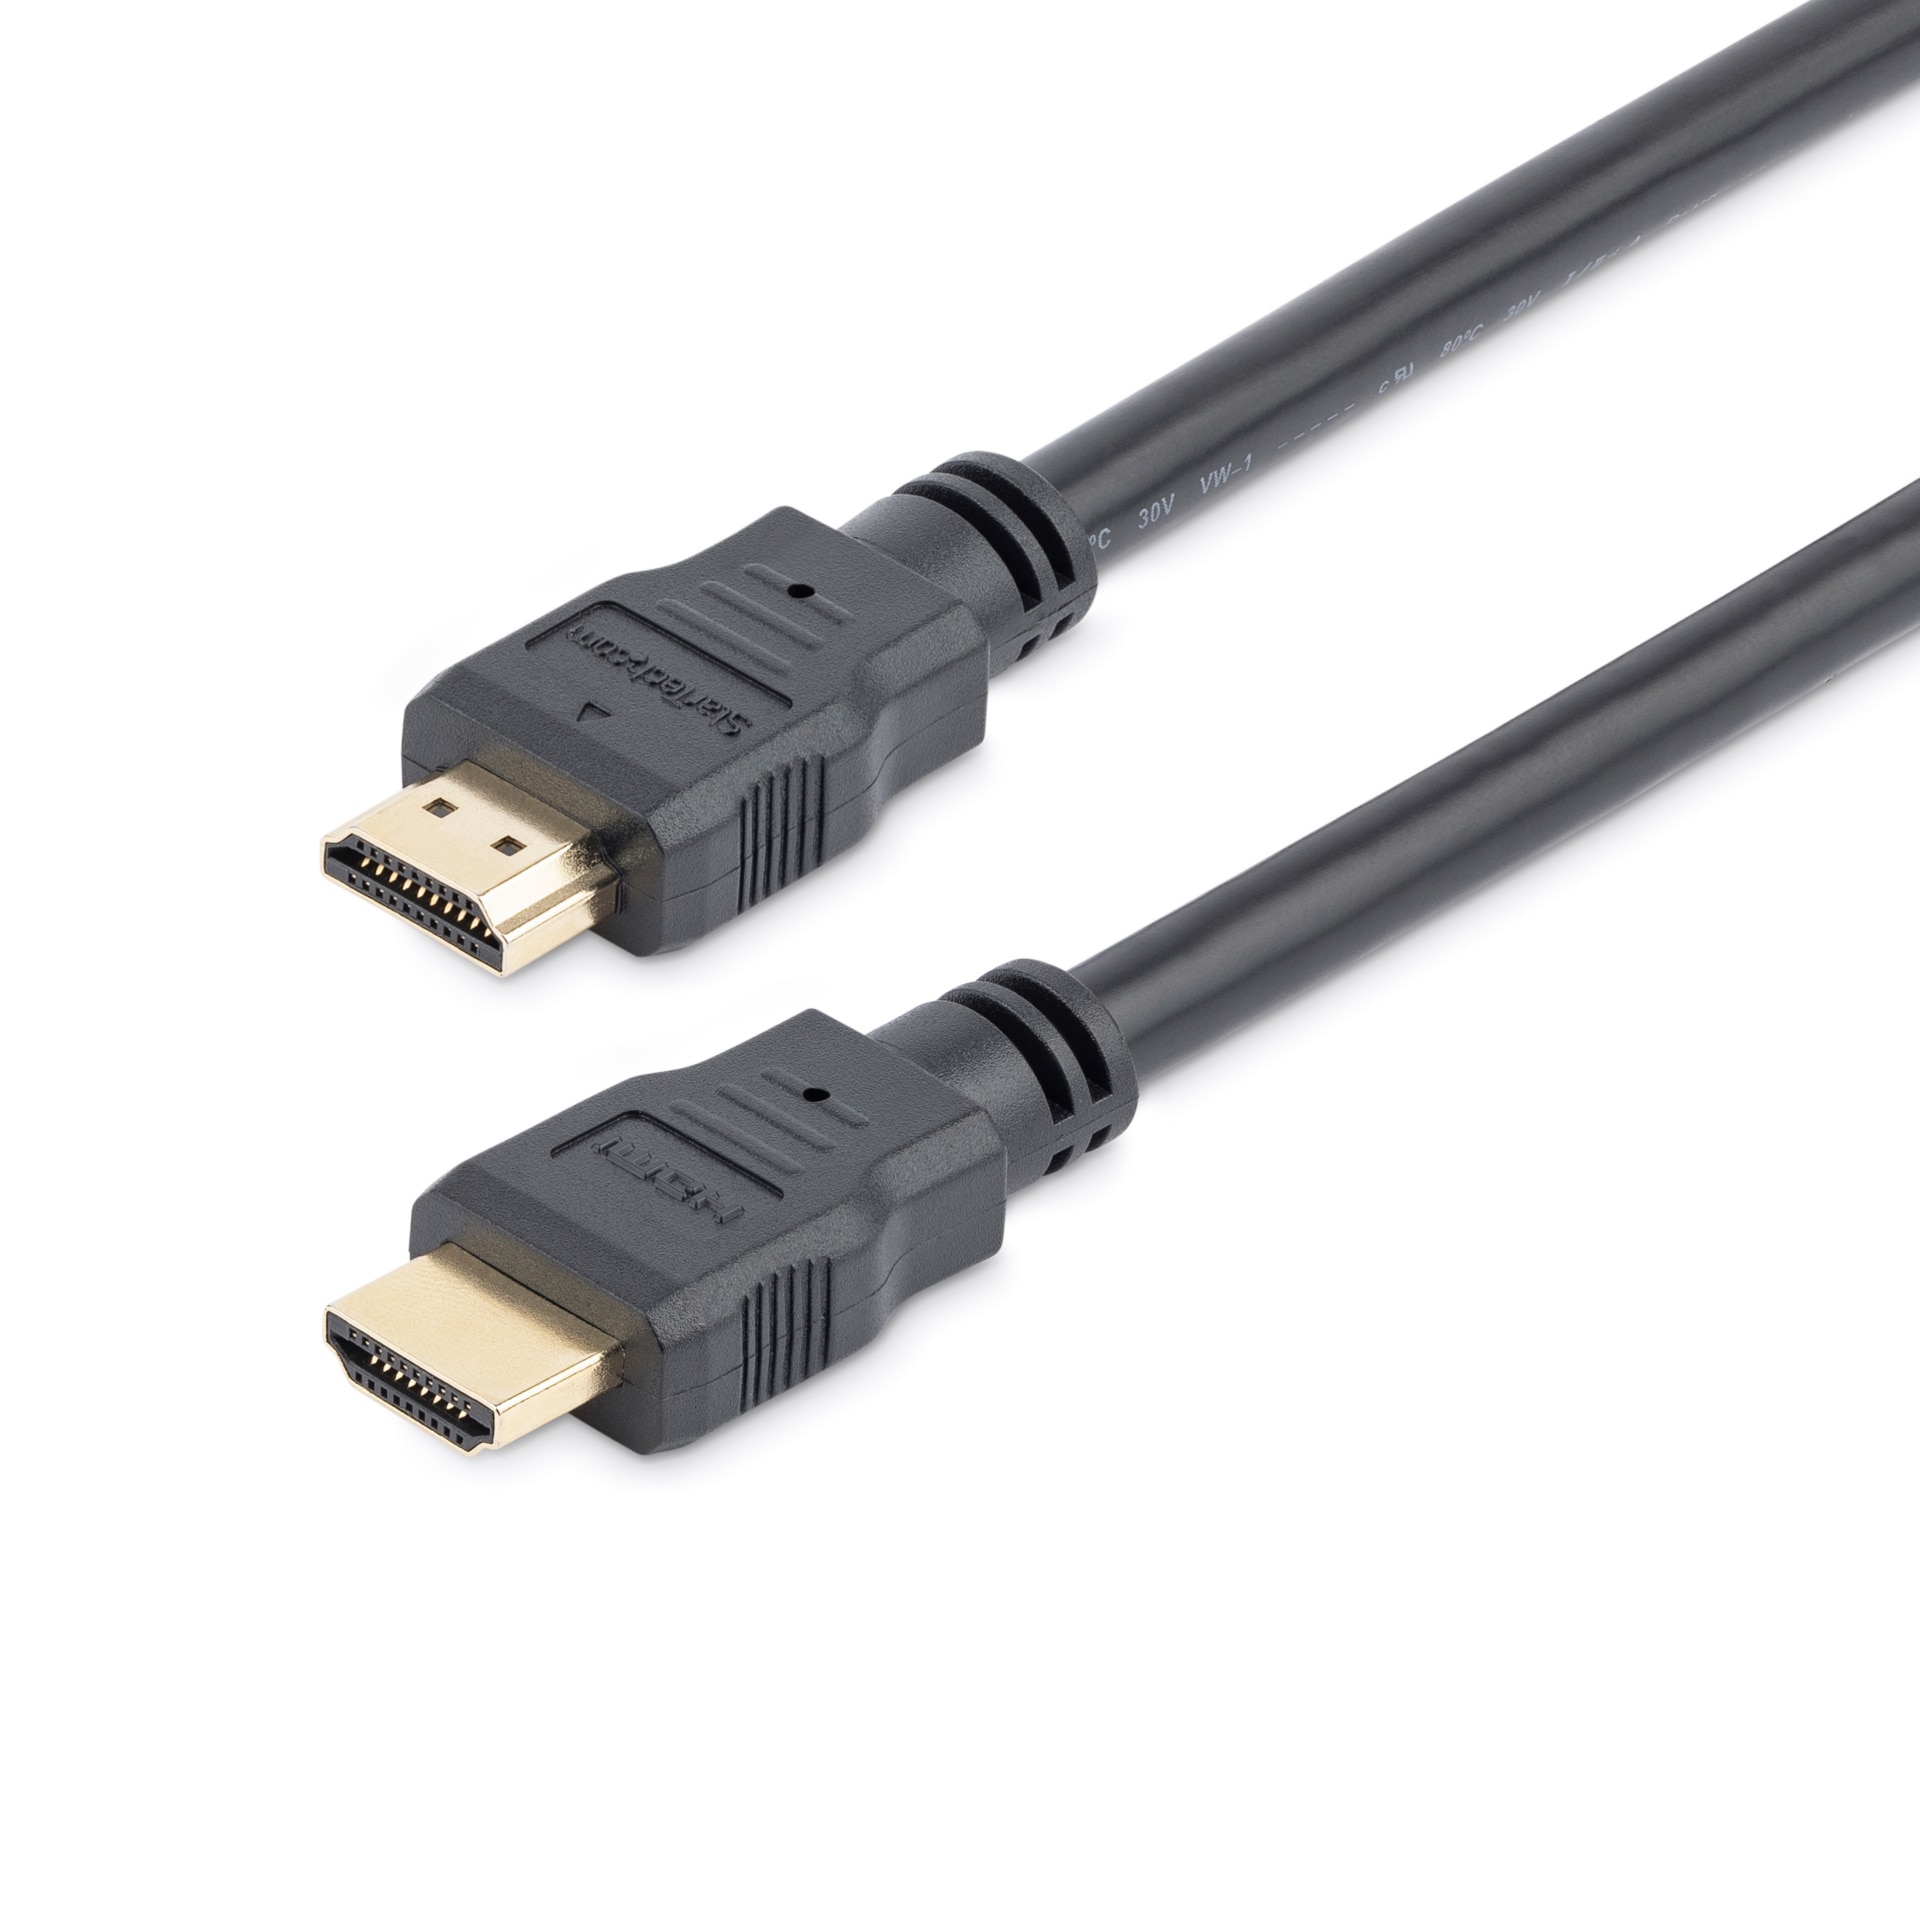 StarTech.com 1ft/30m HDMI Cable - 4K High Speed HDMI 1.4 Cable w/ Ethernet